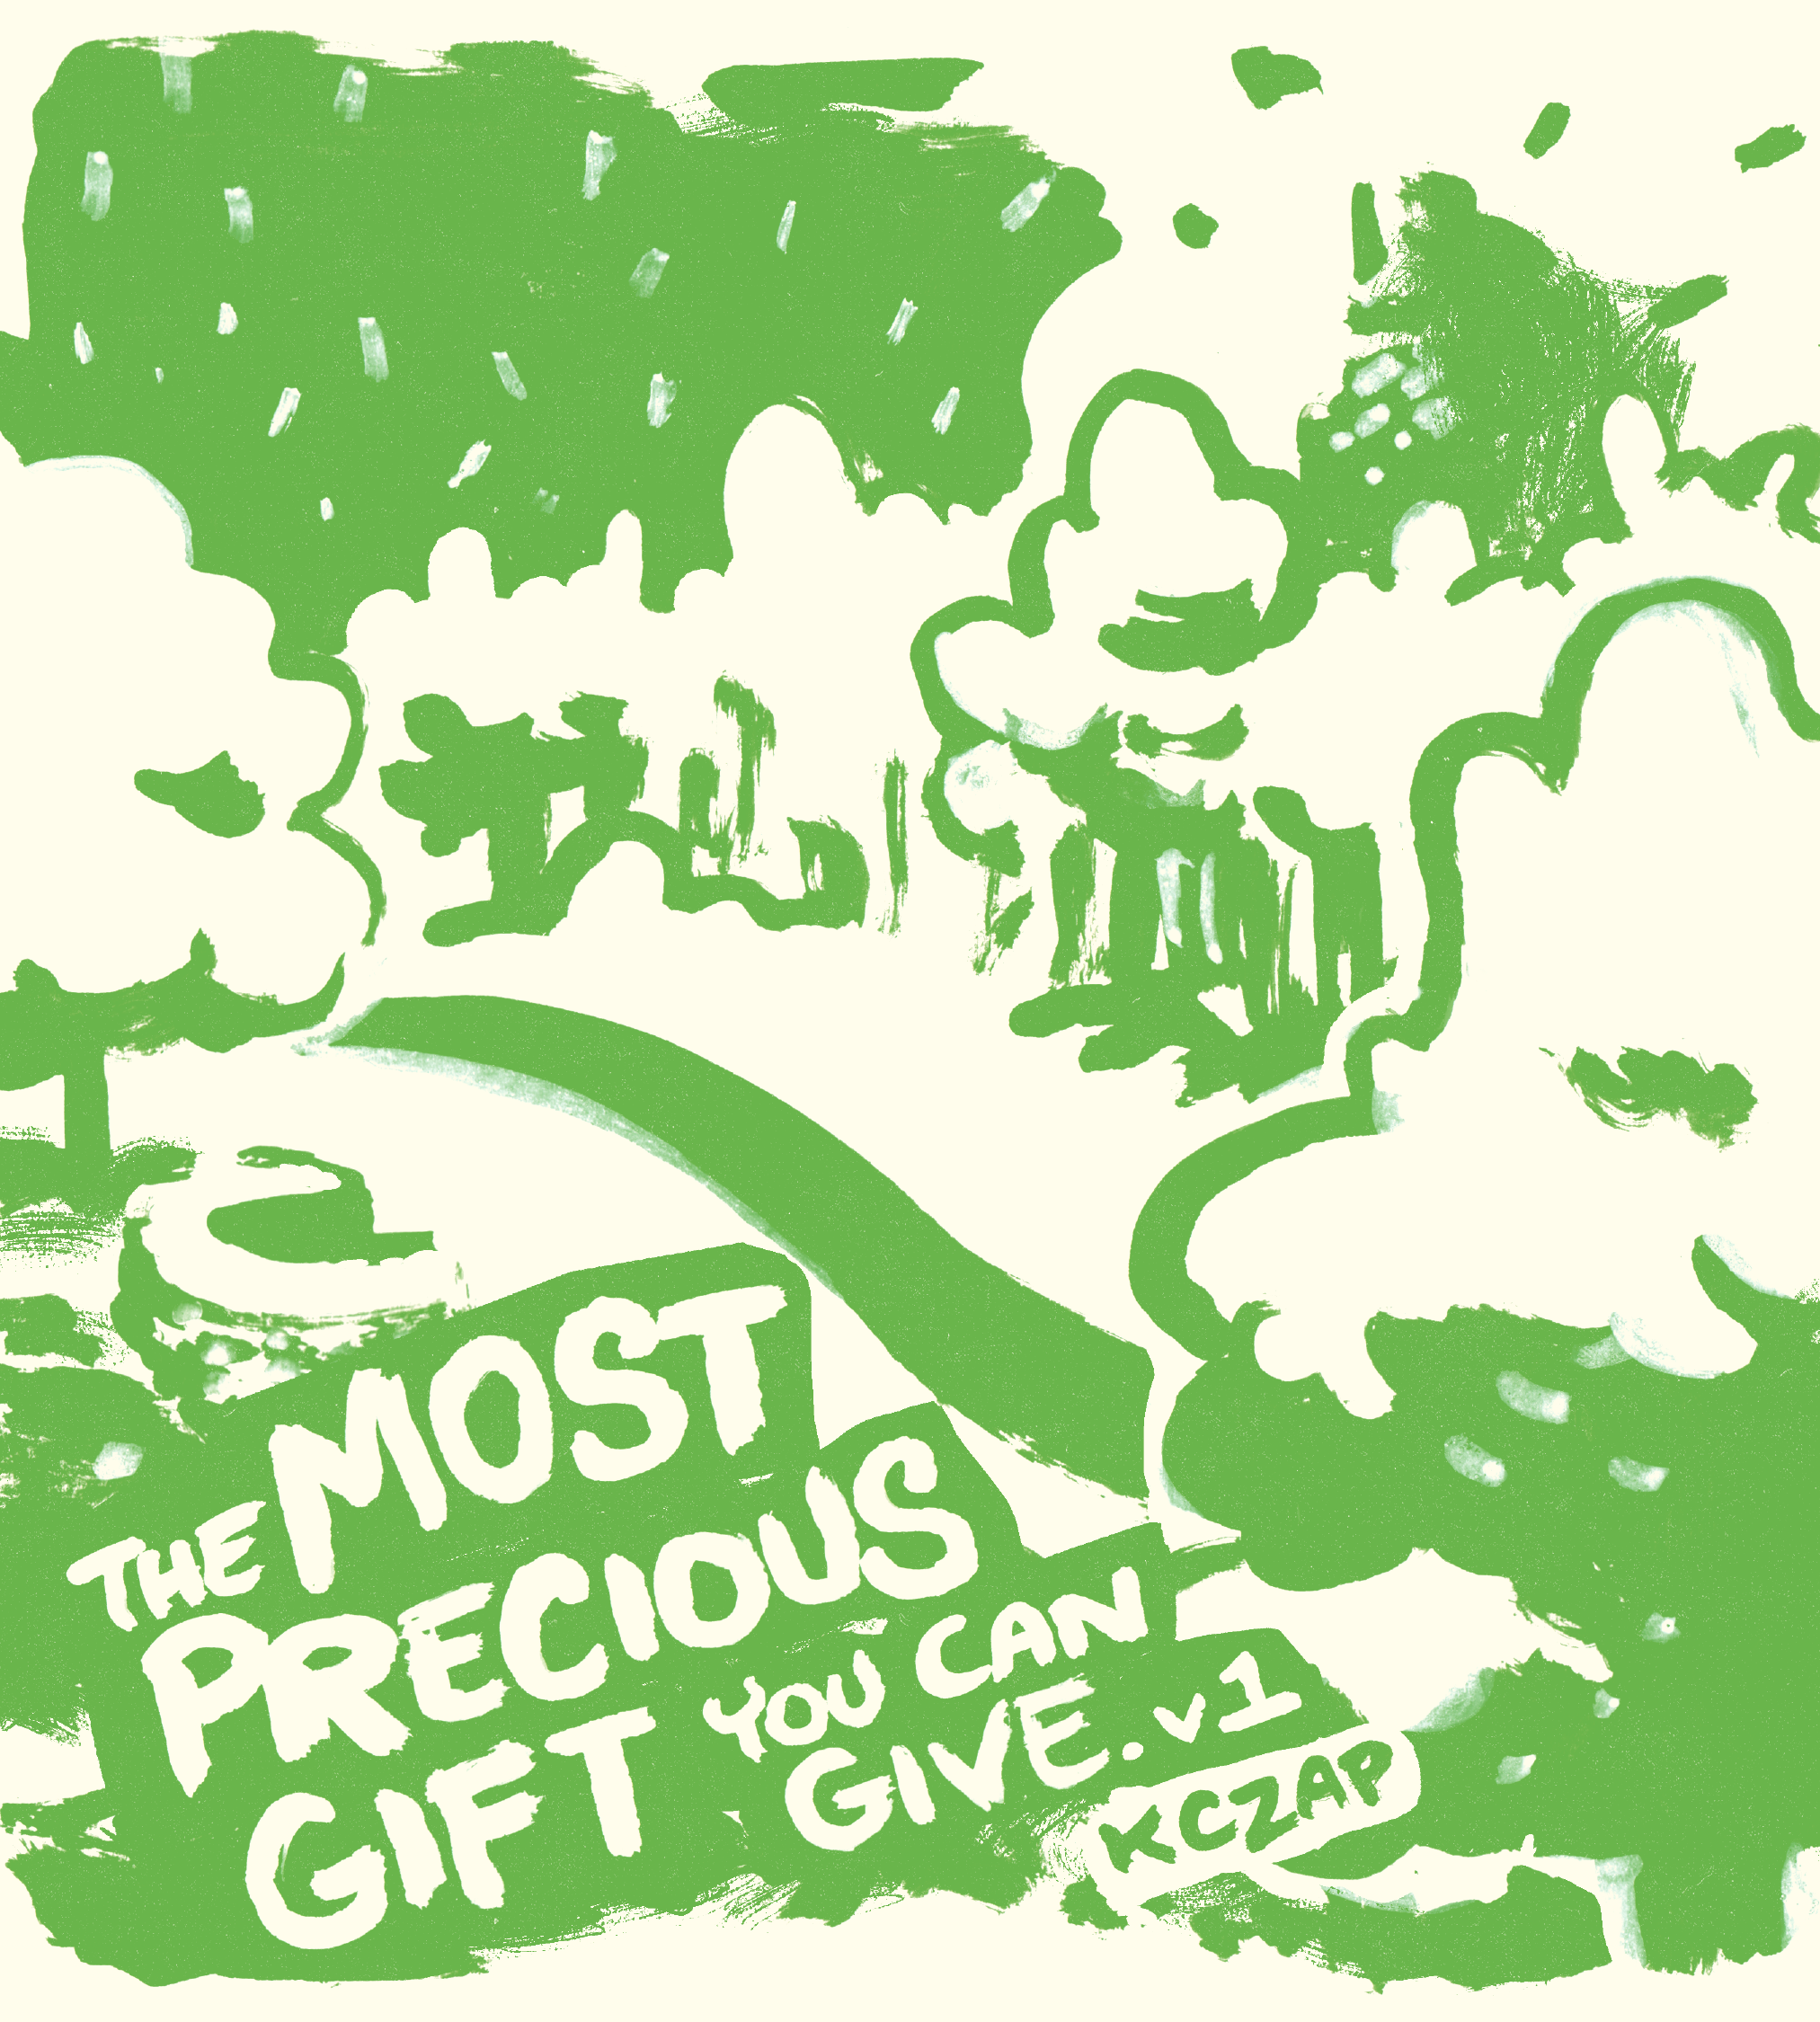 The Most Precious Gift You Can Give vol 1 by K Czap